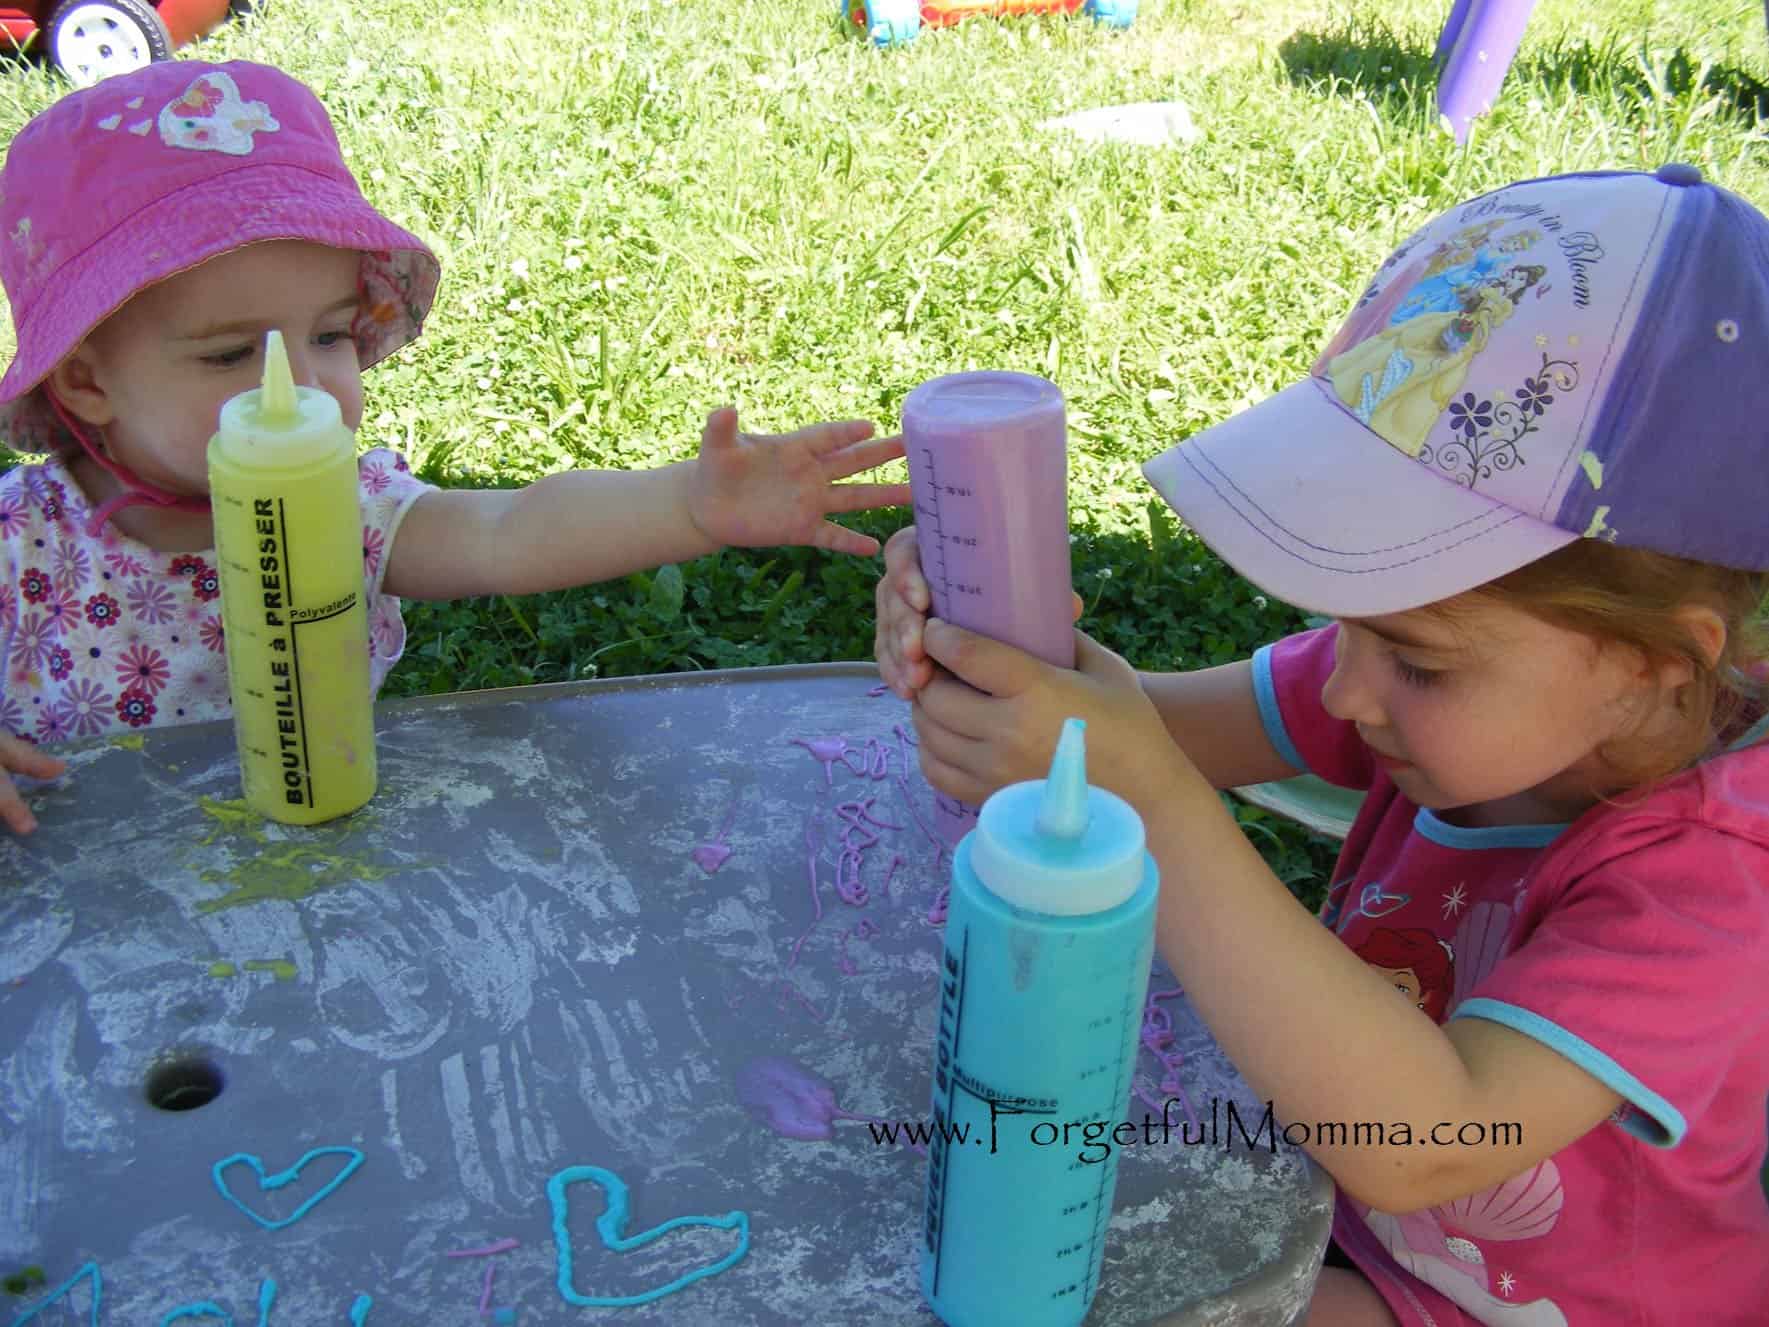 Puffy paint in squeeze bottles adds a different level to the painting artistically. Use it on a wipeable surface for lasting fun.